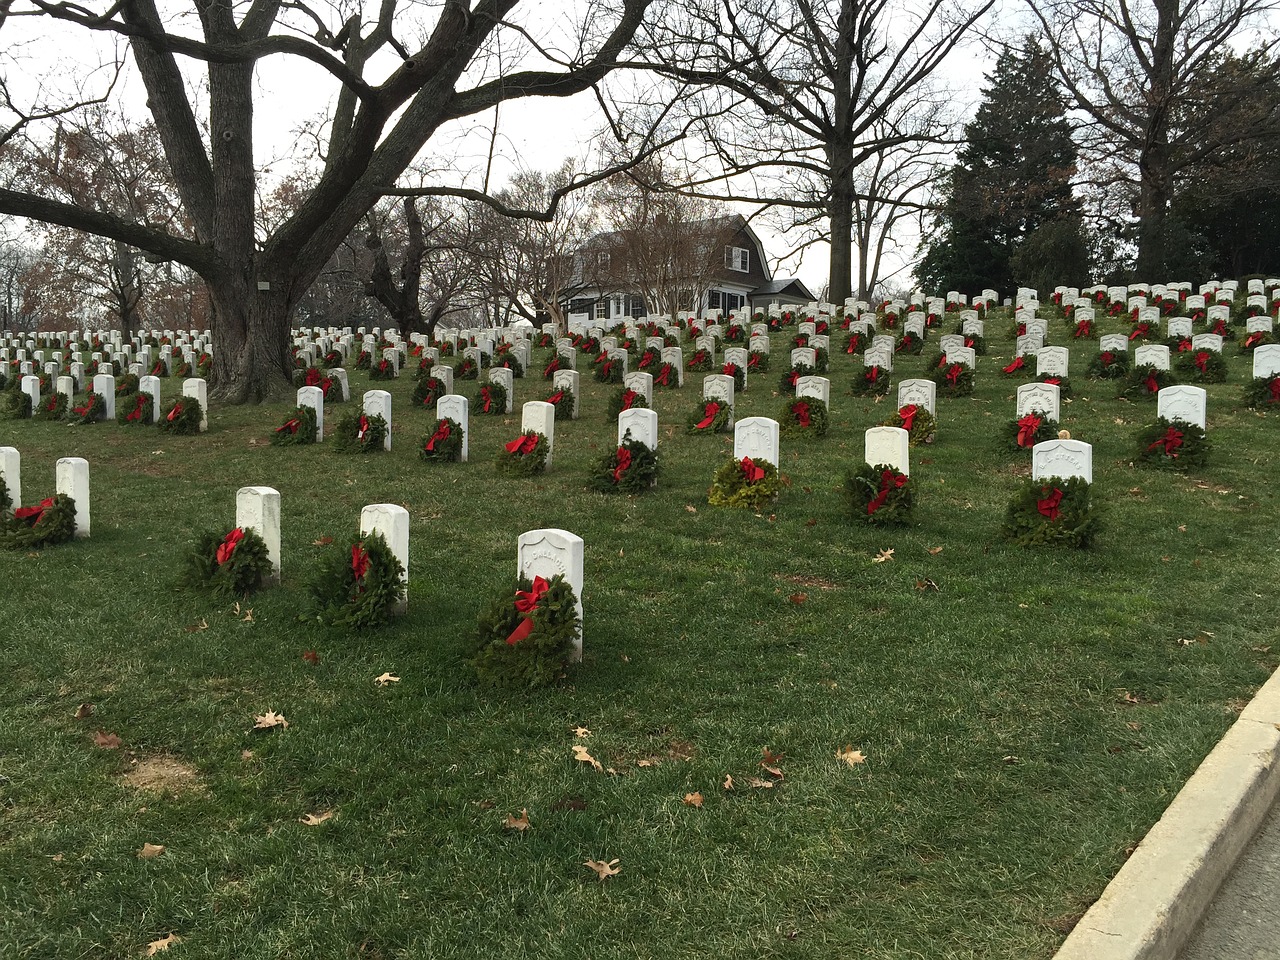 arlington cemetery graves with wreaths free photo